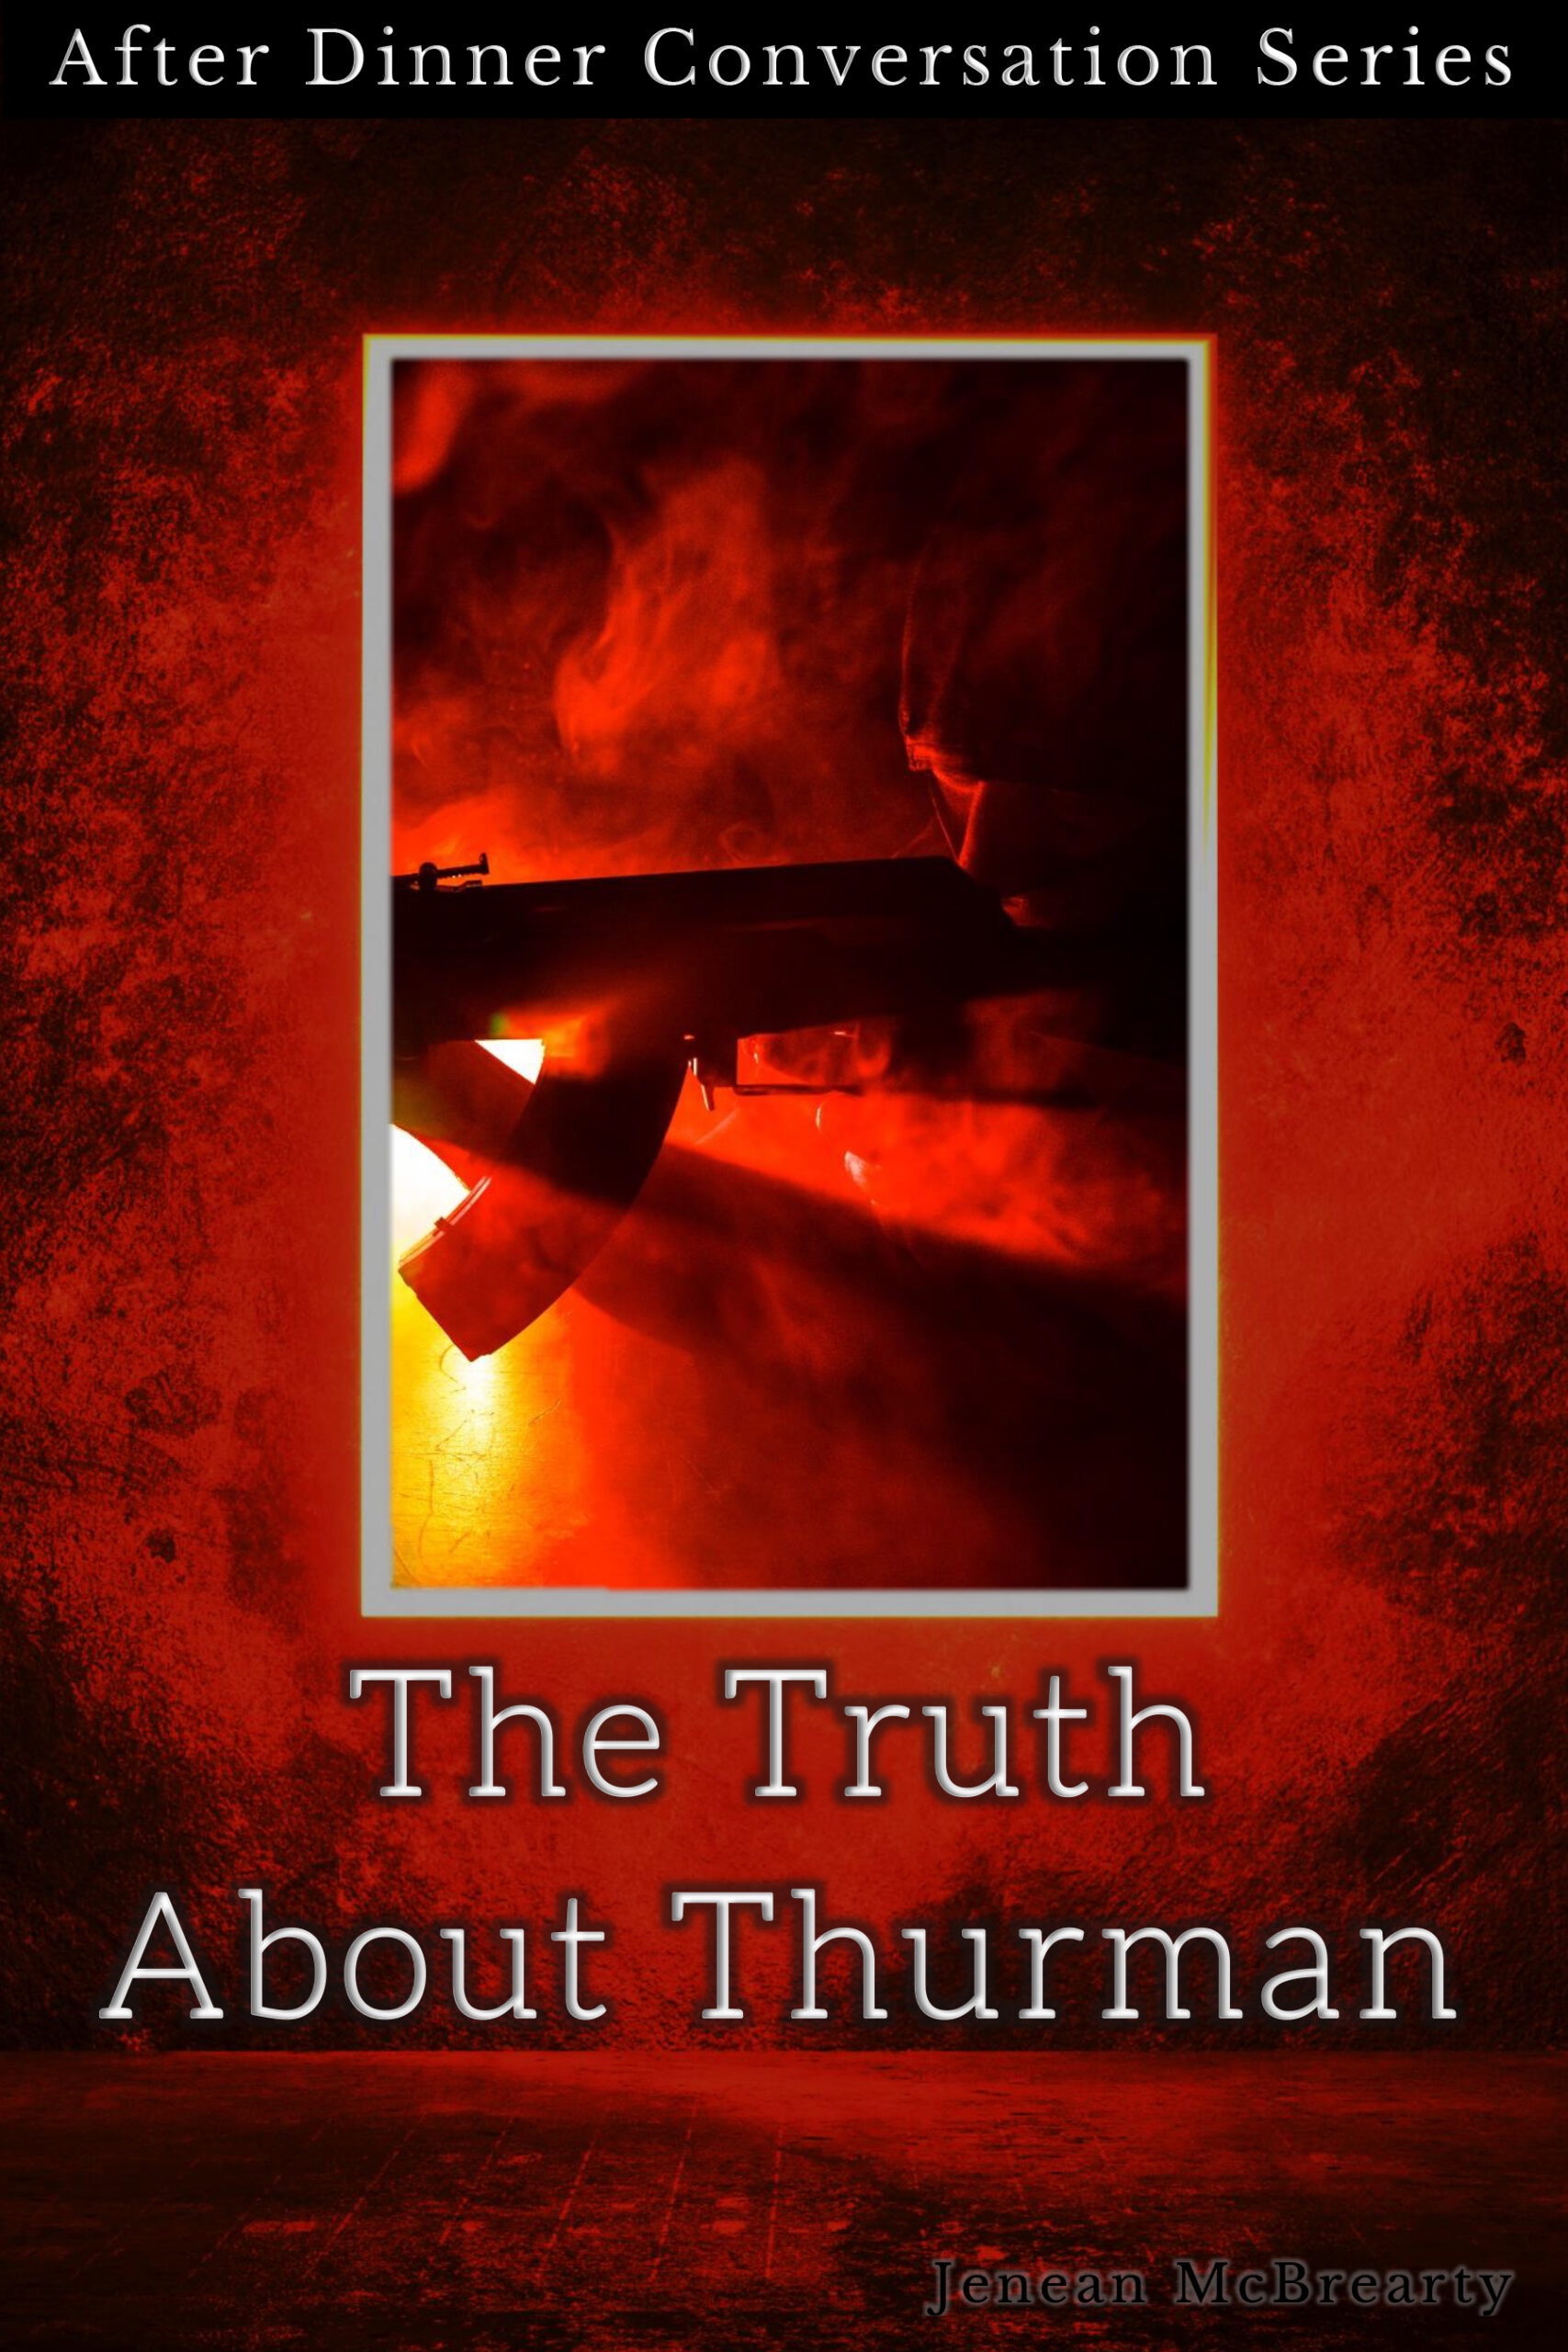 FREE: The Truth About Thurman: After Dinner Conversation Short Story Series by Jenean McBrearty